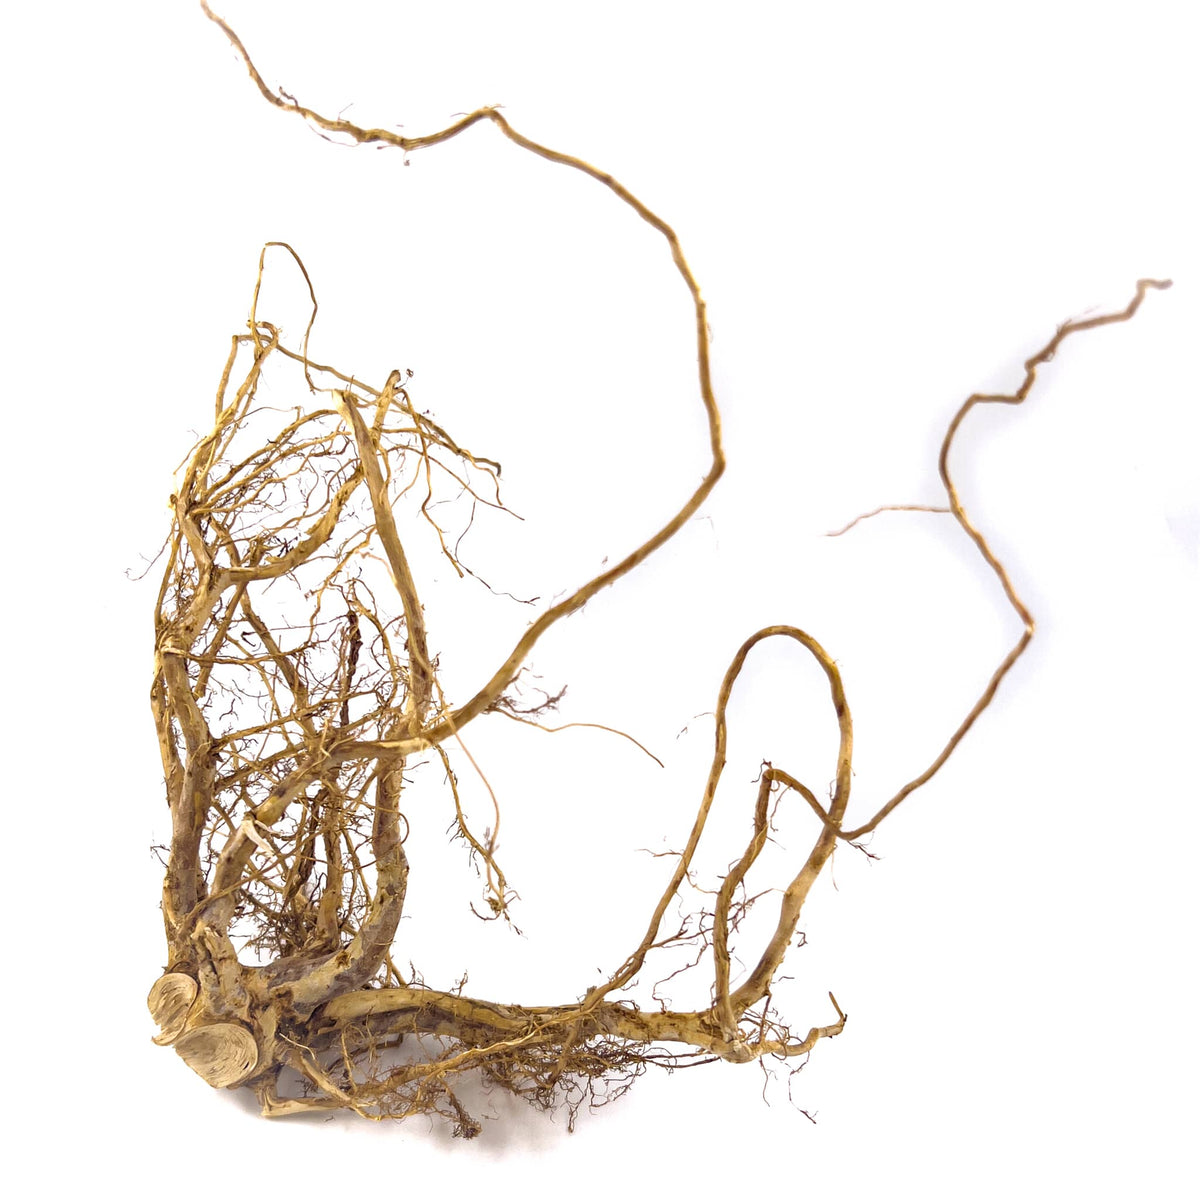 Tangled, spindly, and brown melastoma senggani roots with out stem for aquariums by Betta Botanicals.